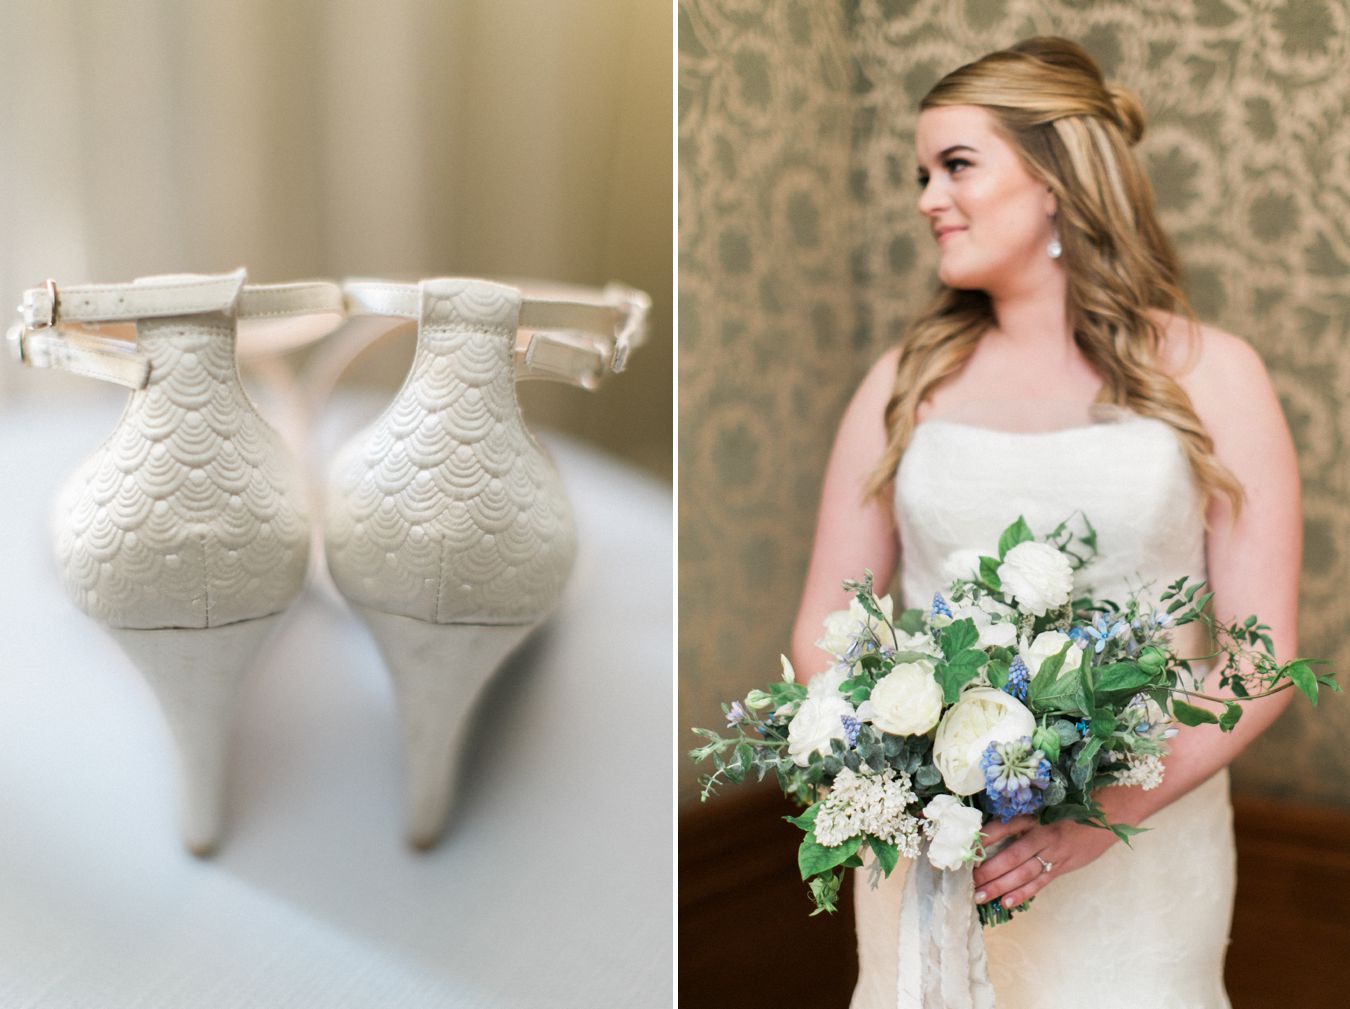 Badgley Mischka bridal shoes | Detroit Athletic Club Wedding | Passionflower Events | Cory Weber Photography